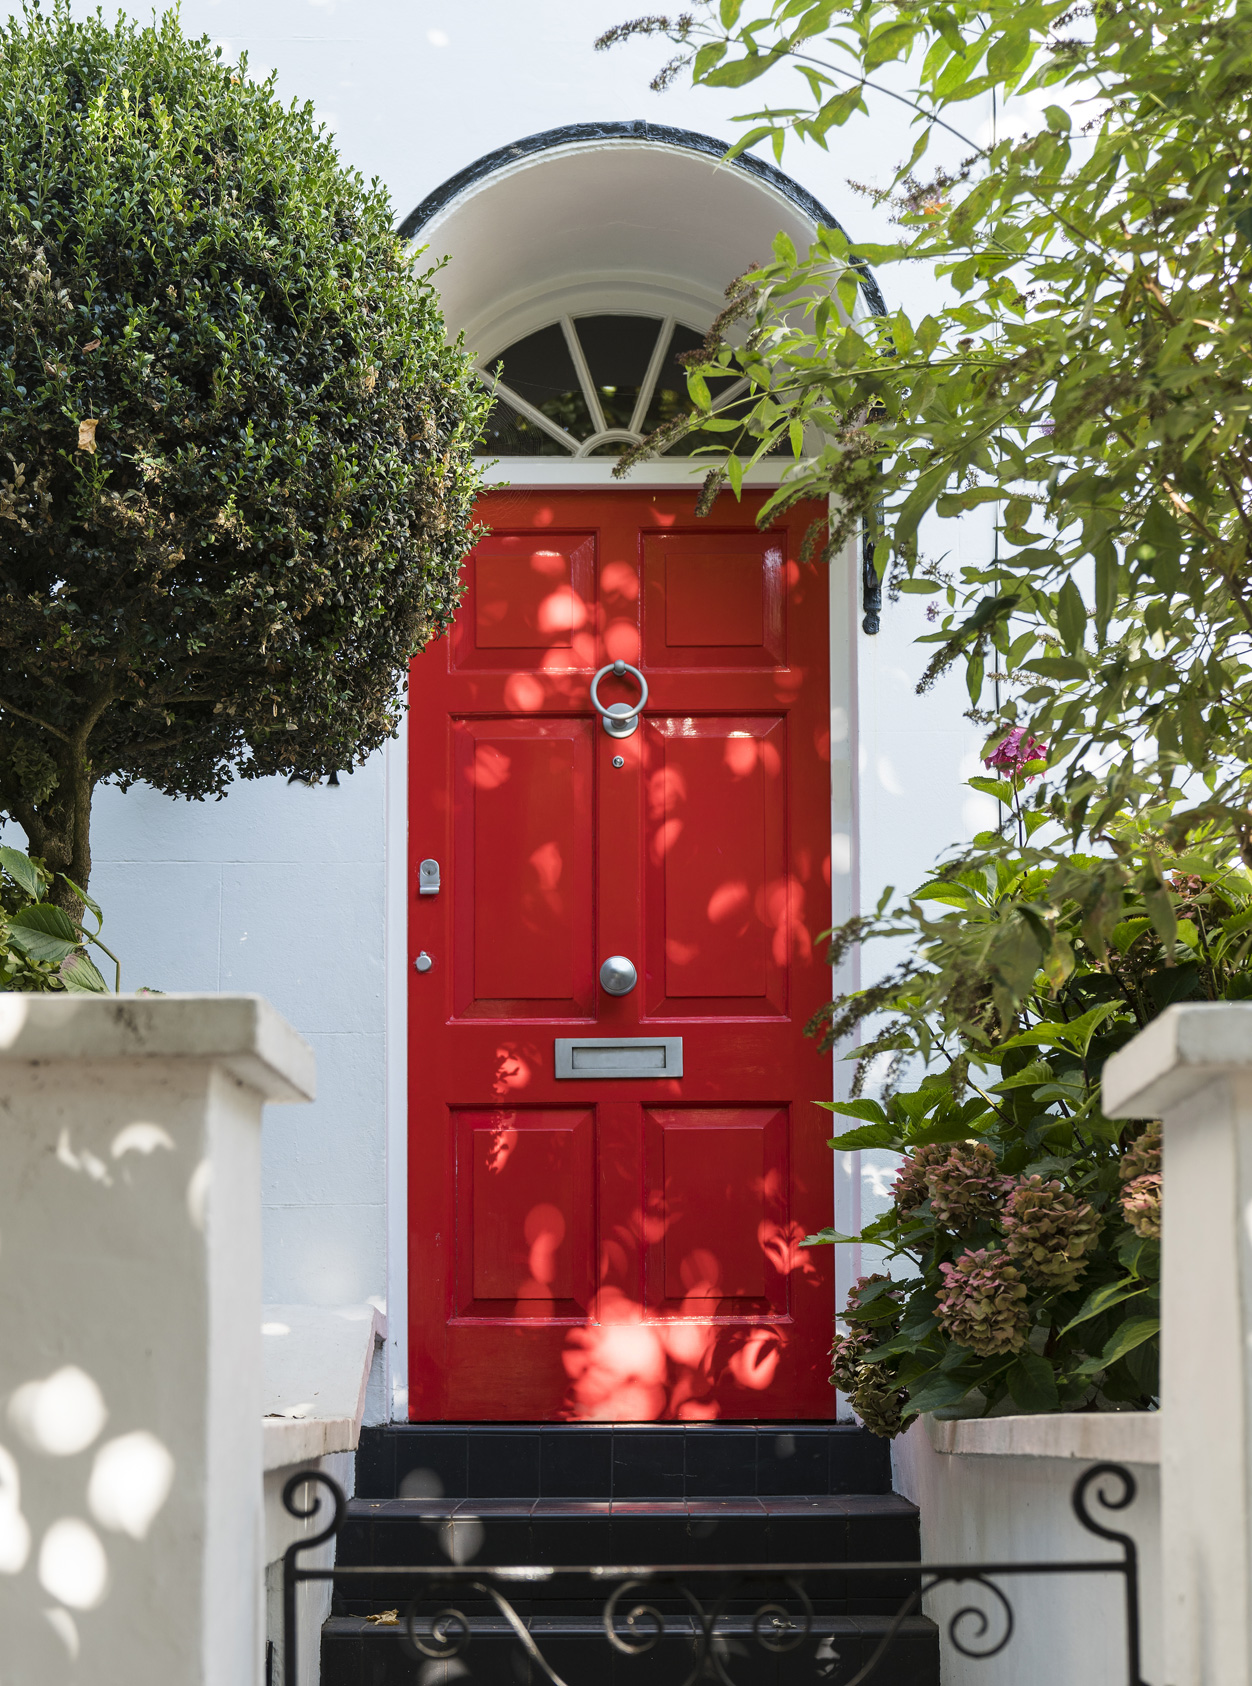 A classic hampstead townhouse frontage with a bright red front door, with surrounding greenery.